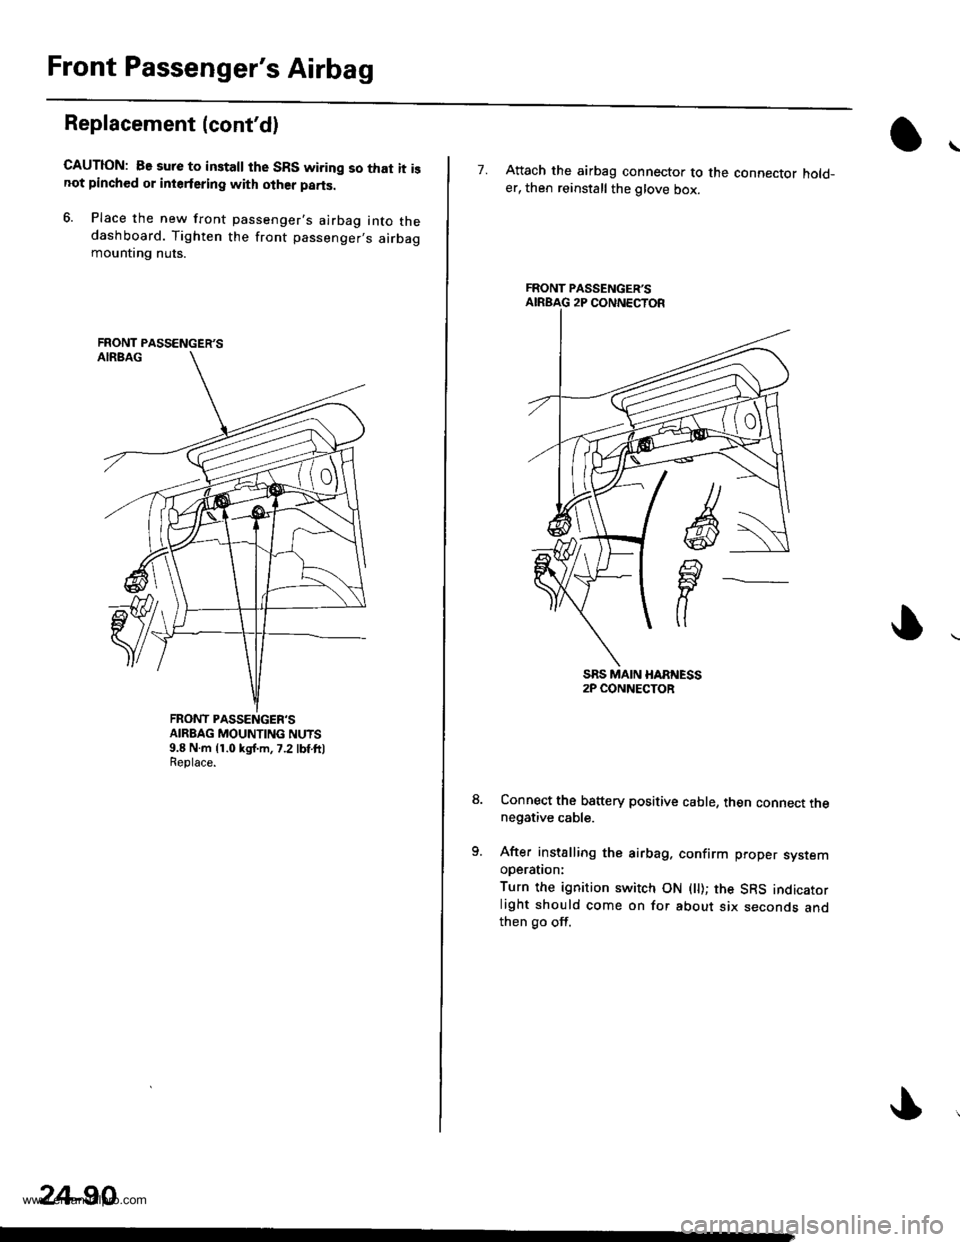 HONDA CR-V 1998 RD1-RD3 / 1.G Workshop Manual 
Front Passengers Airbag
Replacement (contd)
GAUTION: Be sure to installthe SRS wiring so that it isnot pinched or interfering with olher parts.
6. Place the new front passengers airbag into thedas